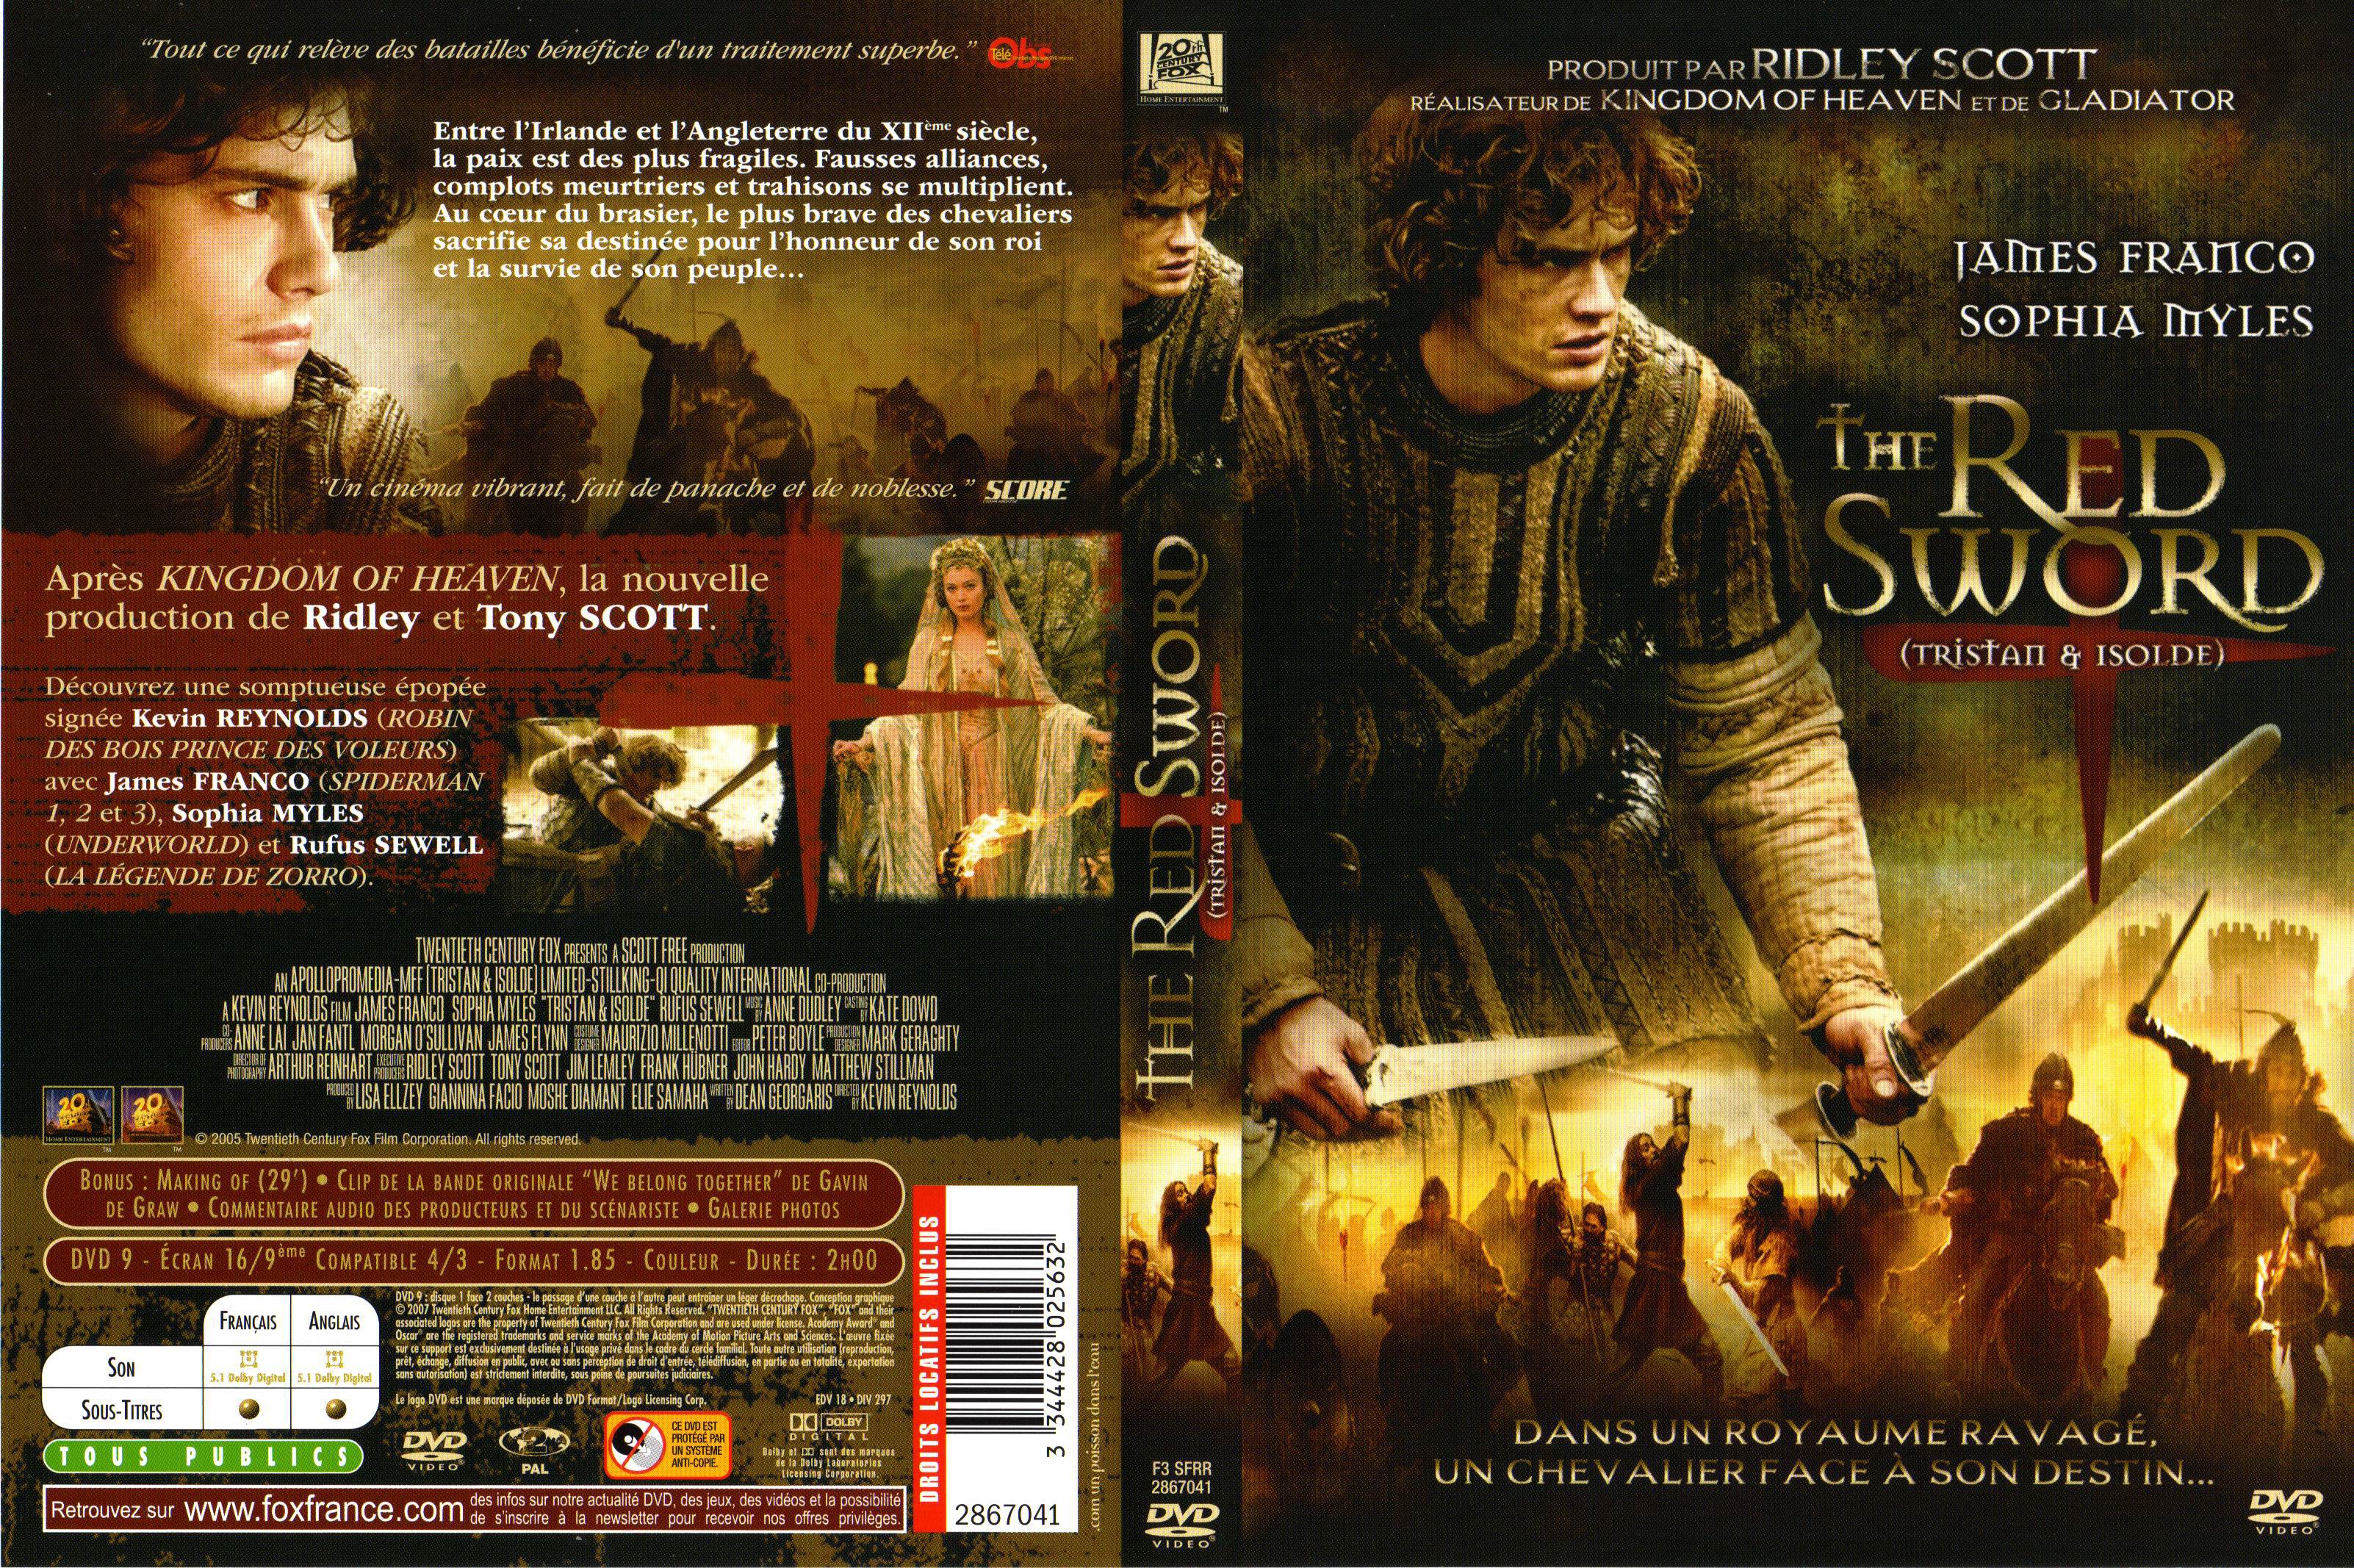 Jaquette DVD The red sword